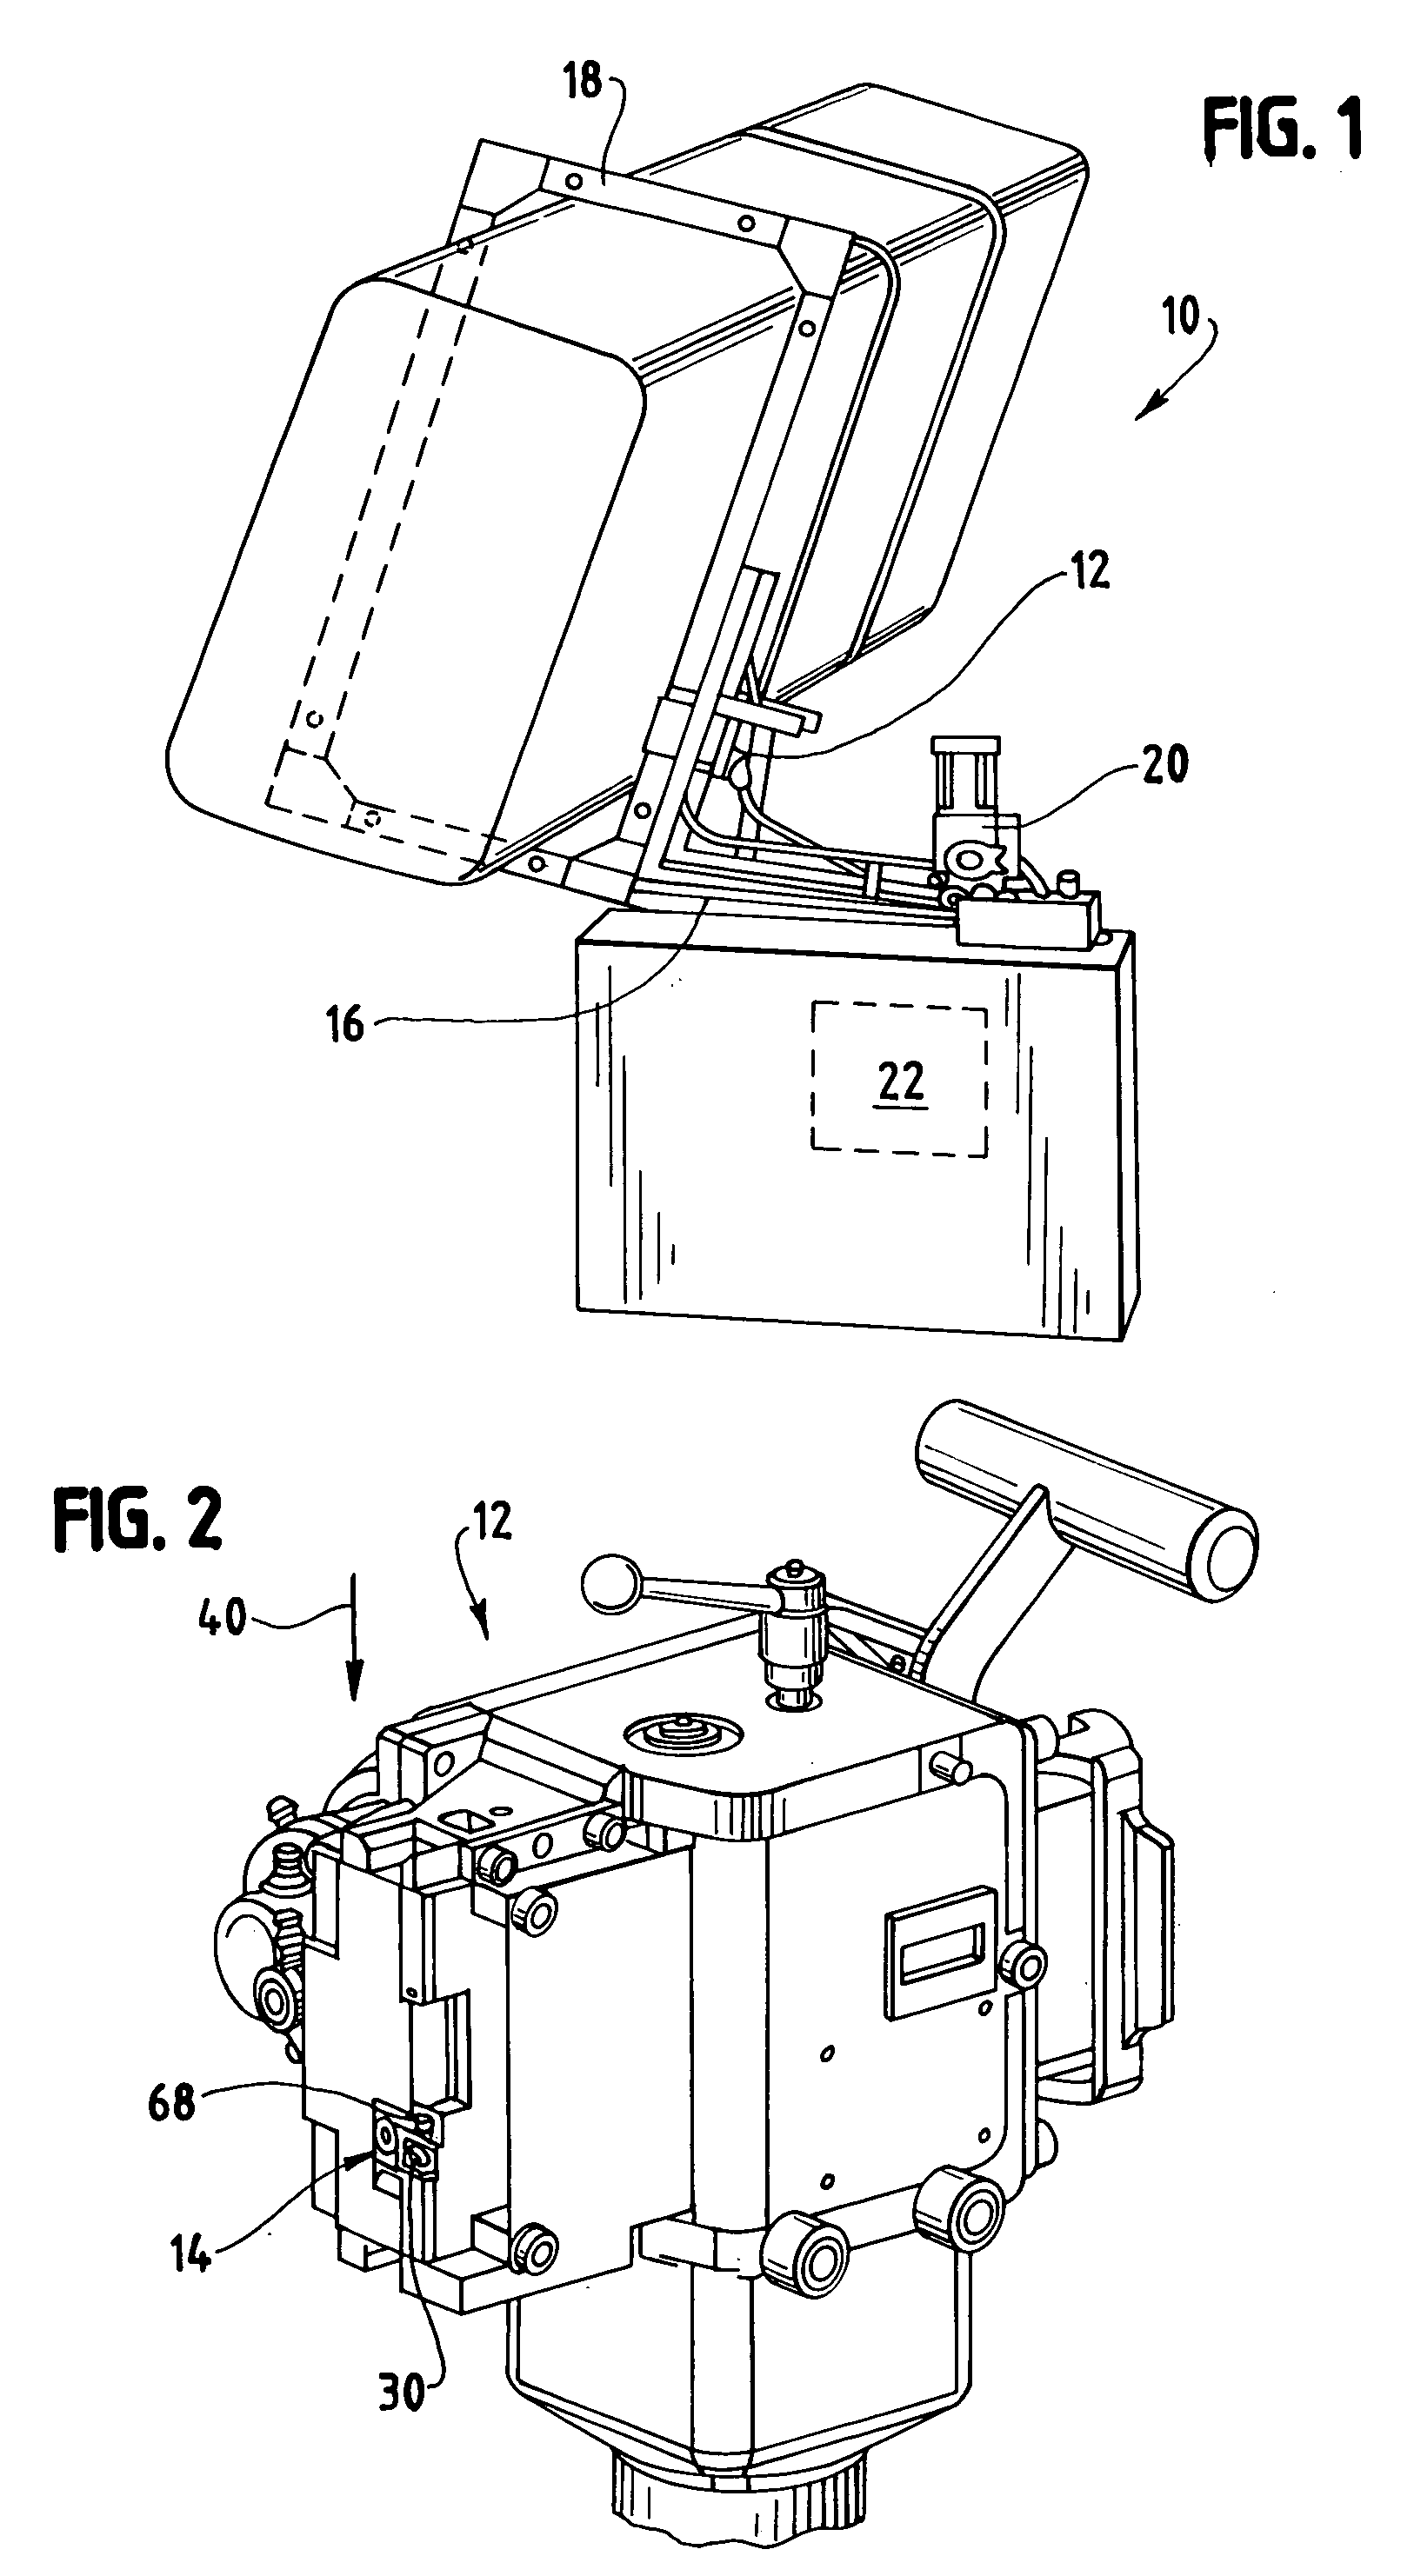 Strapping machine with self cleaning feed limit switch components